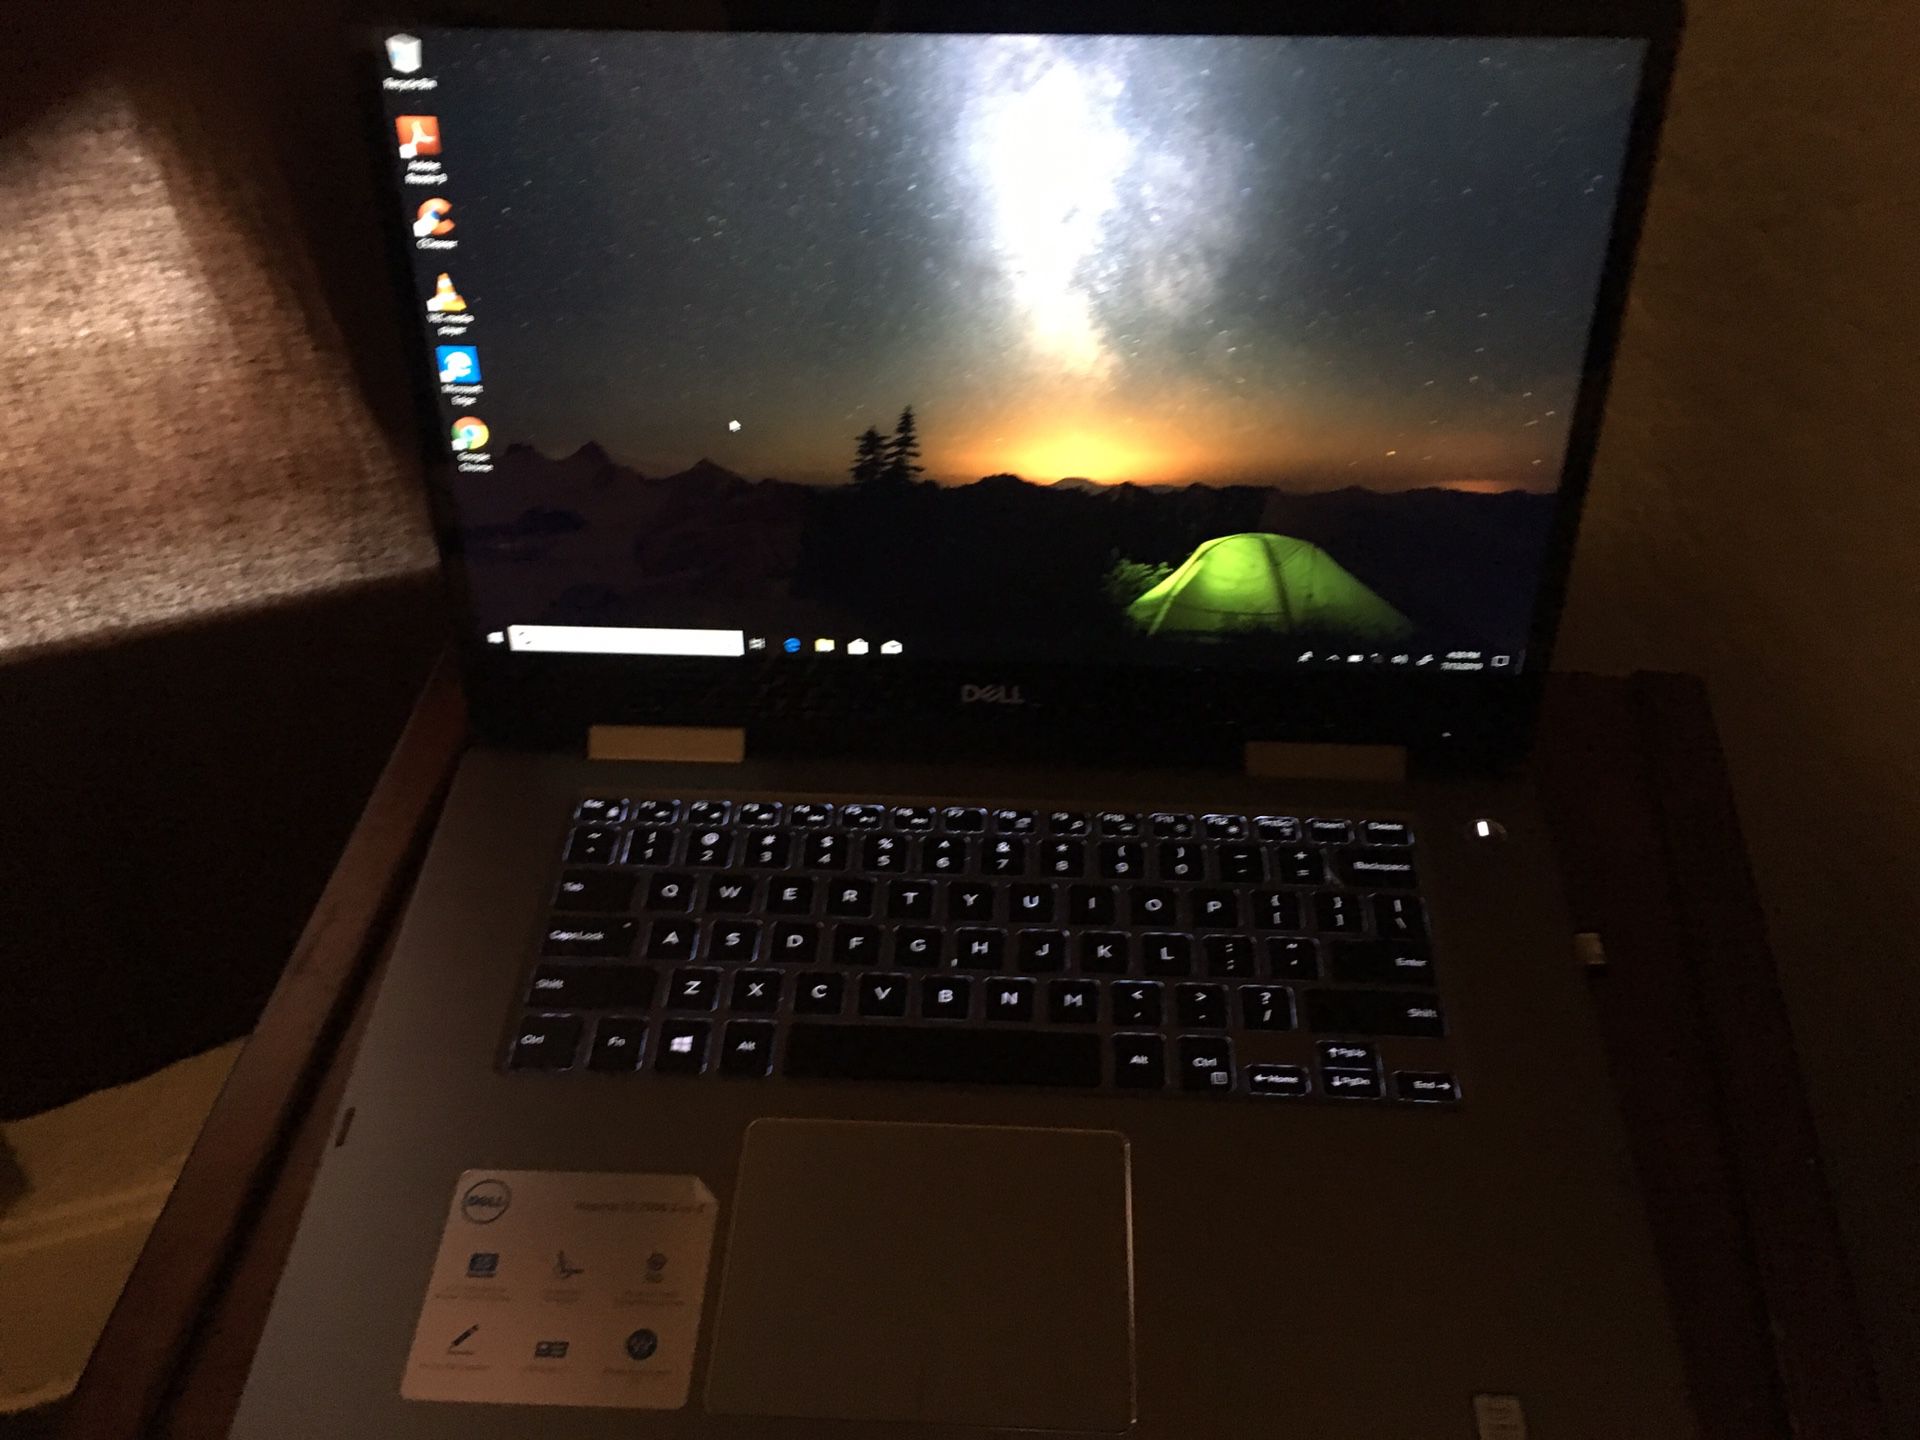 Dell Inspiron 15 series 7000 2 in 1 laptop